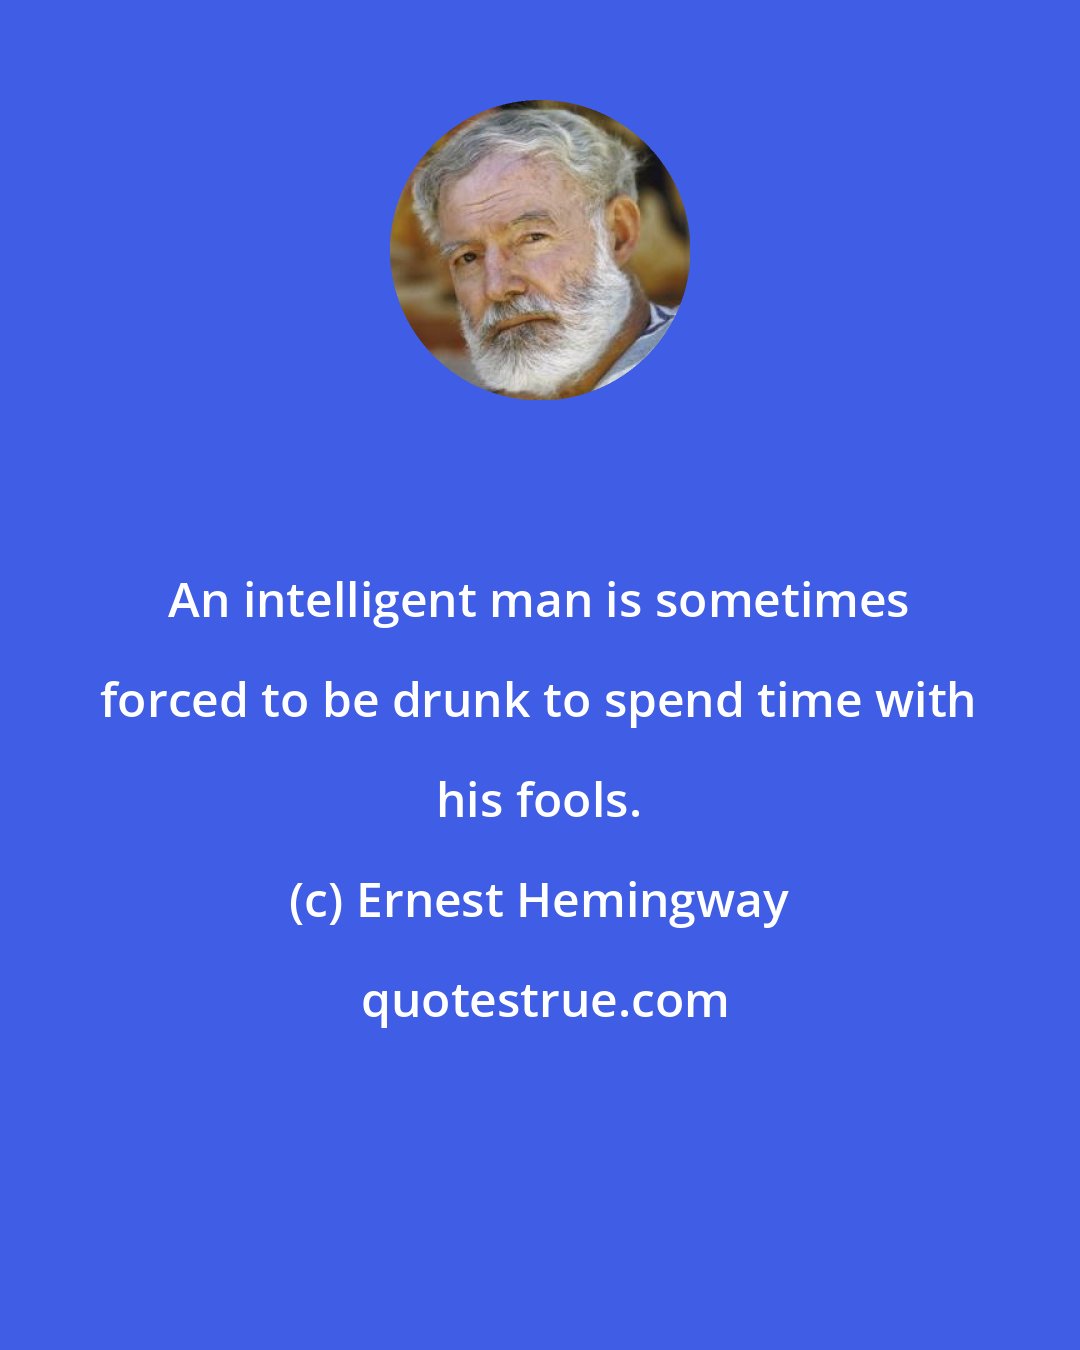 Ernest Hemingway: An intelligent man is sometimes forced to be drunk to spend time with his fools.